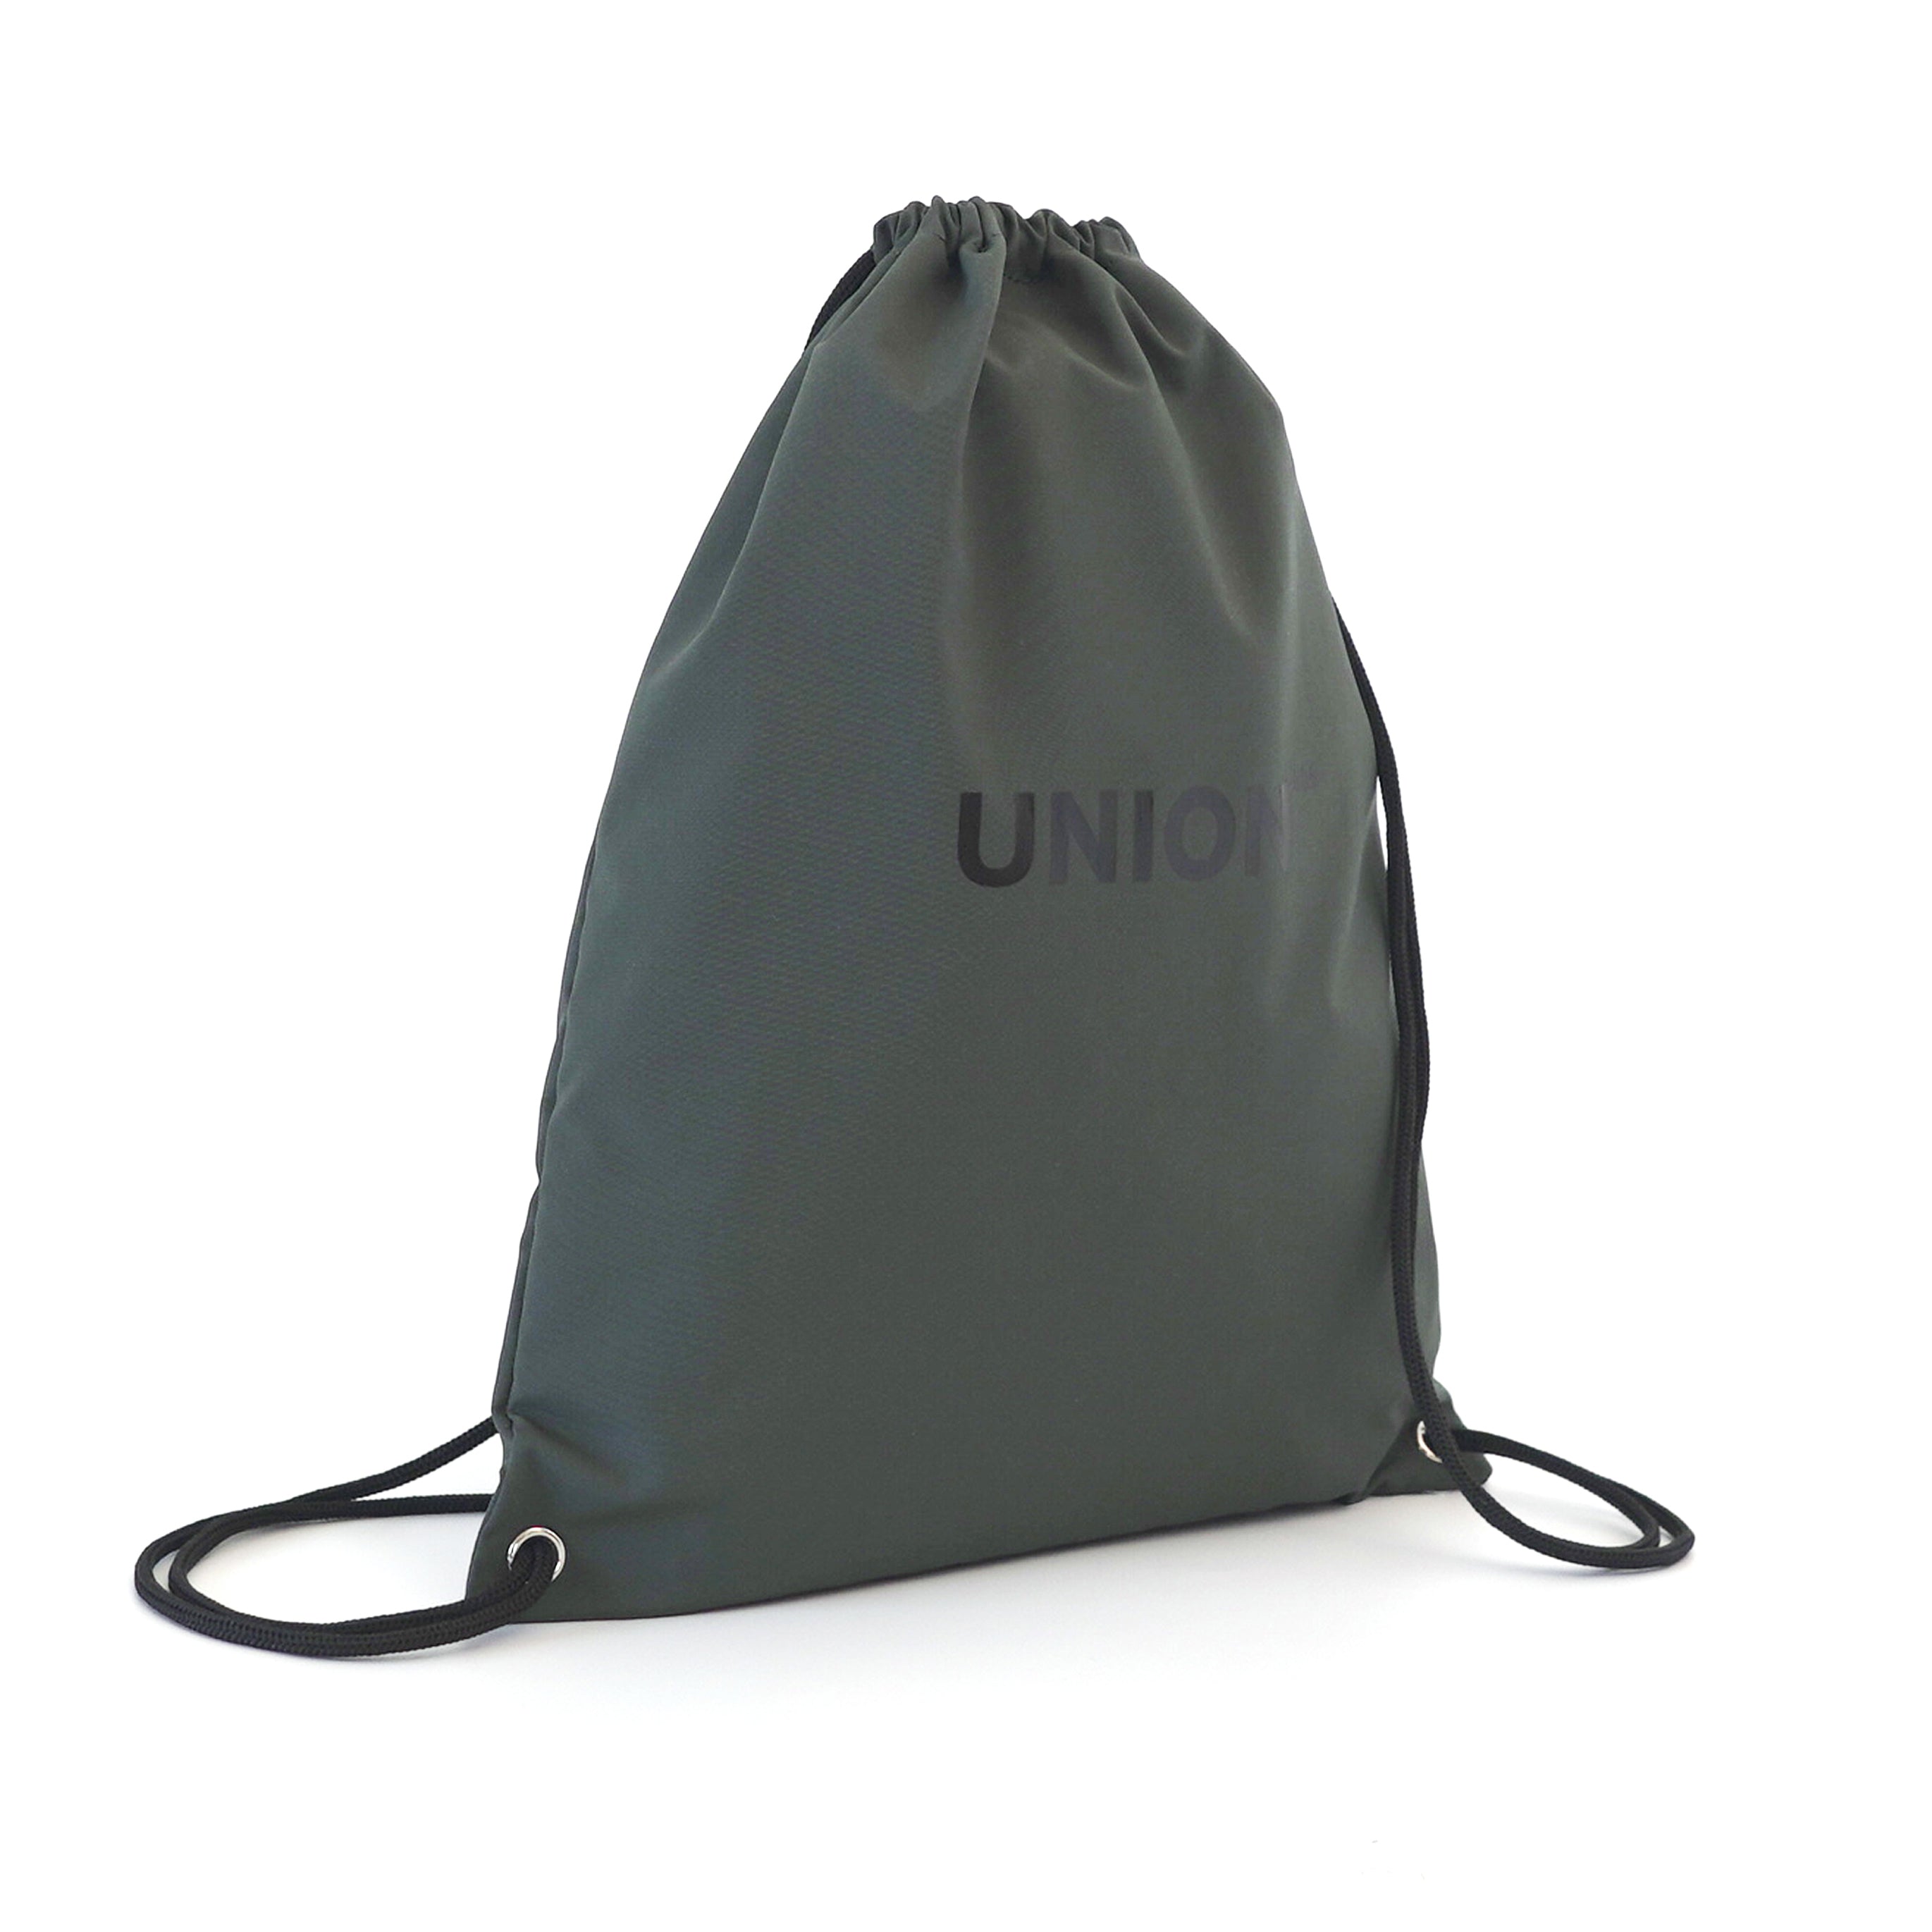 Union Backpack ユニオン バックパック リュック ダークセージ ...